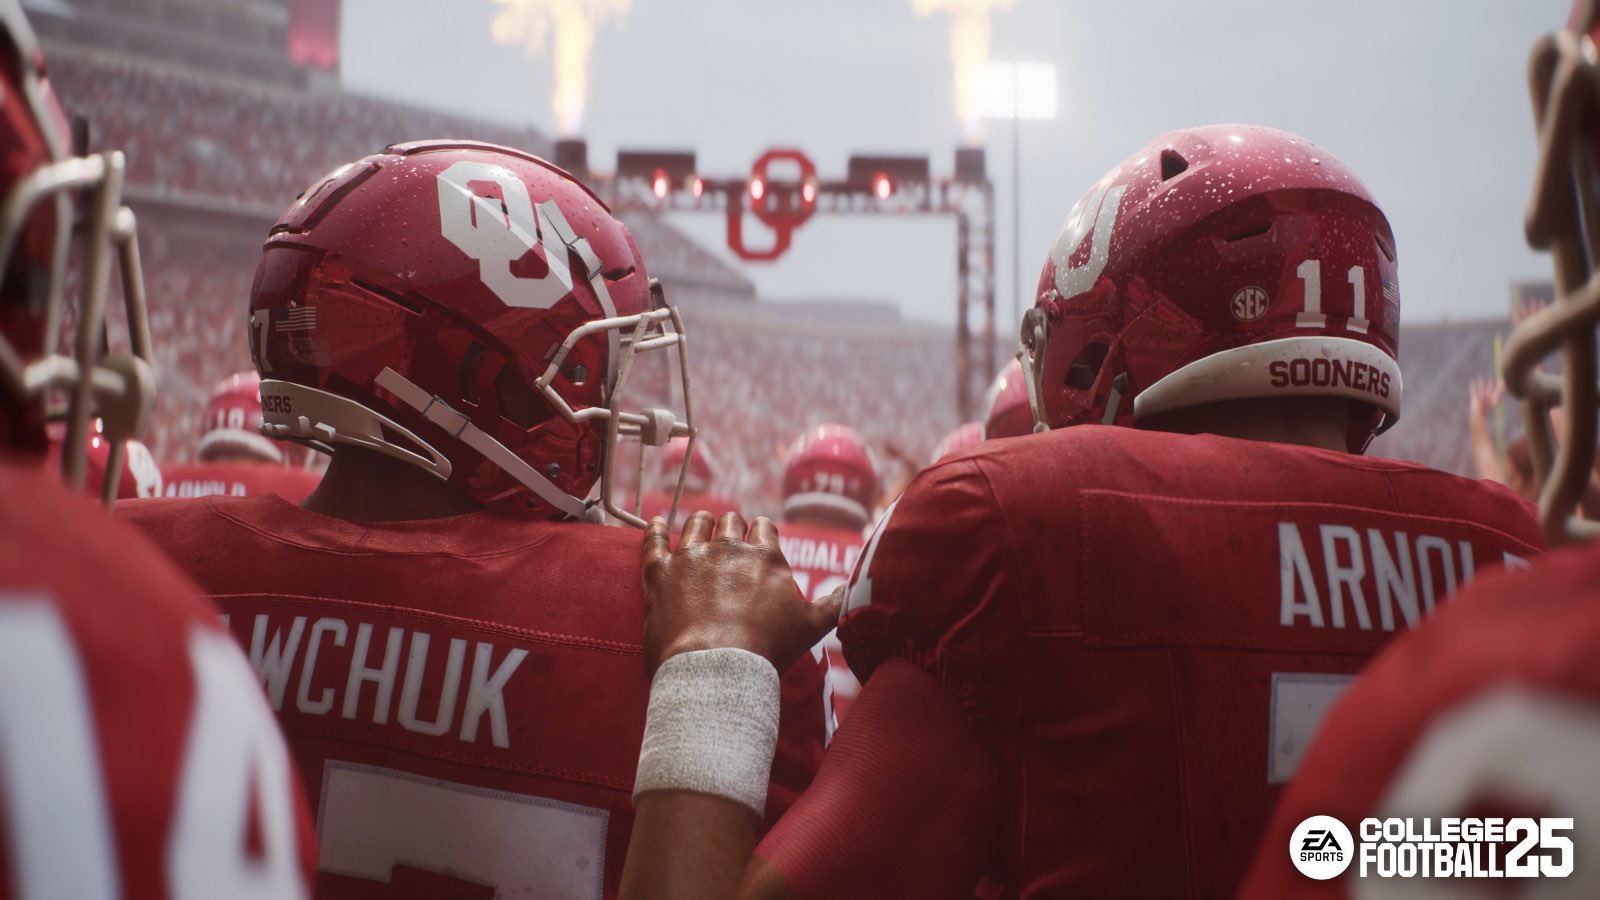 EA College Football 25 Stadium Rankings Spark Online Outcry: Who's in the Top 10?